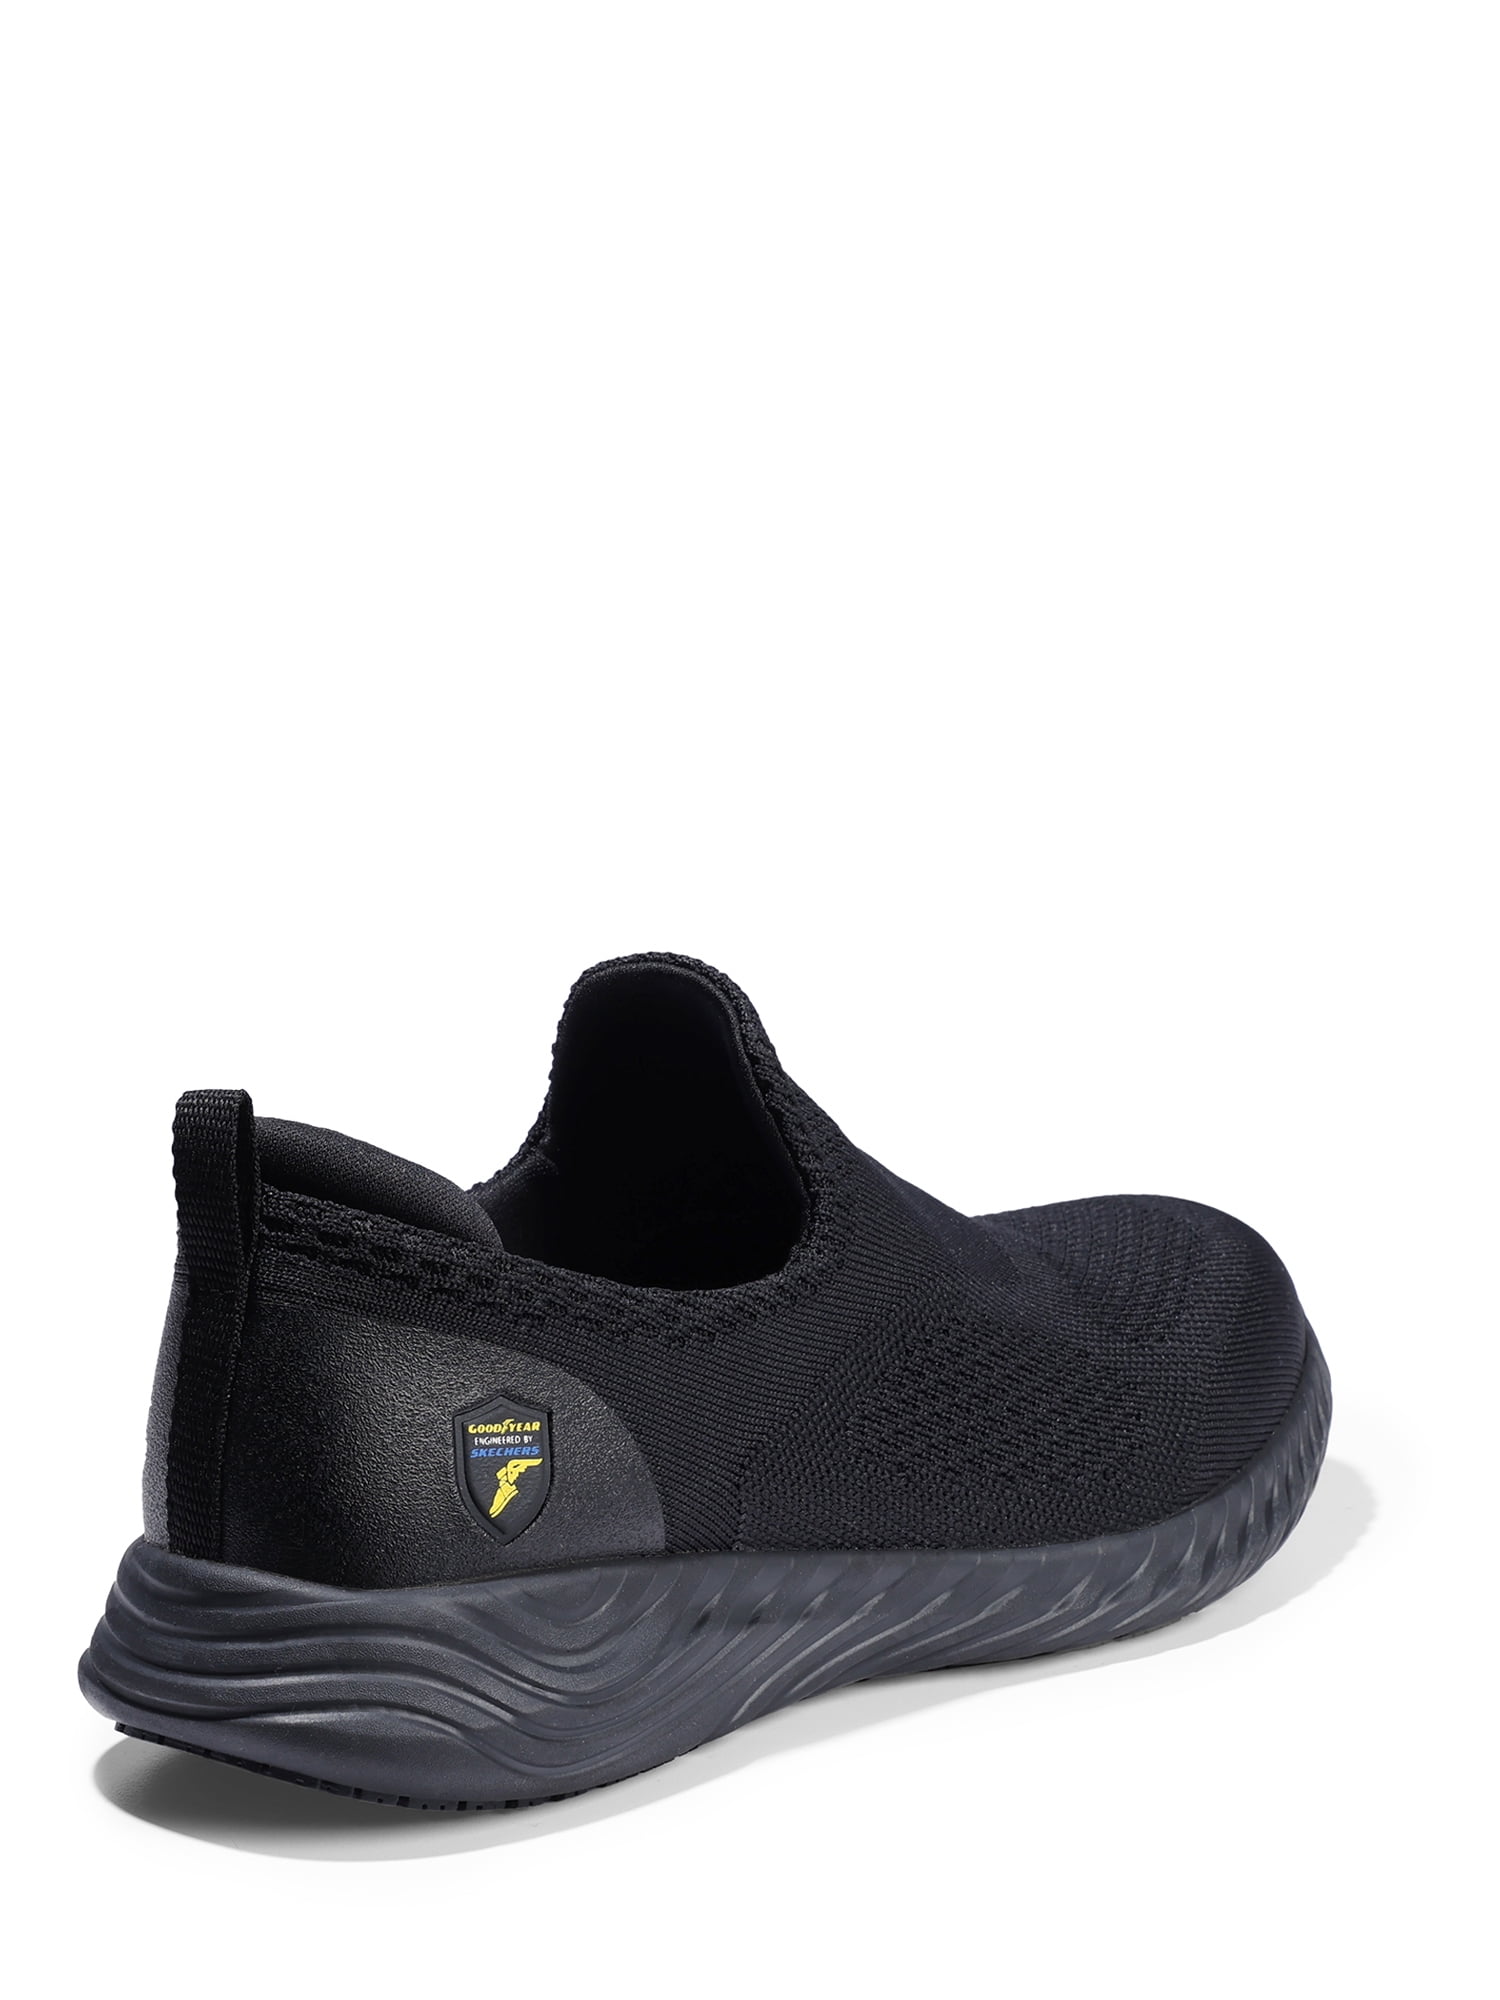 Skechers Shoes - Upto 50% to 80% OFF on Skechers Shoes (स्केचर्स जूते)  Online For Men at Best Prices in India | Flipkart.com